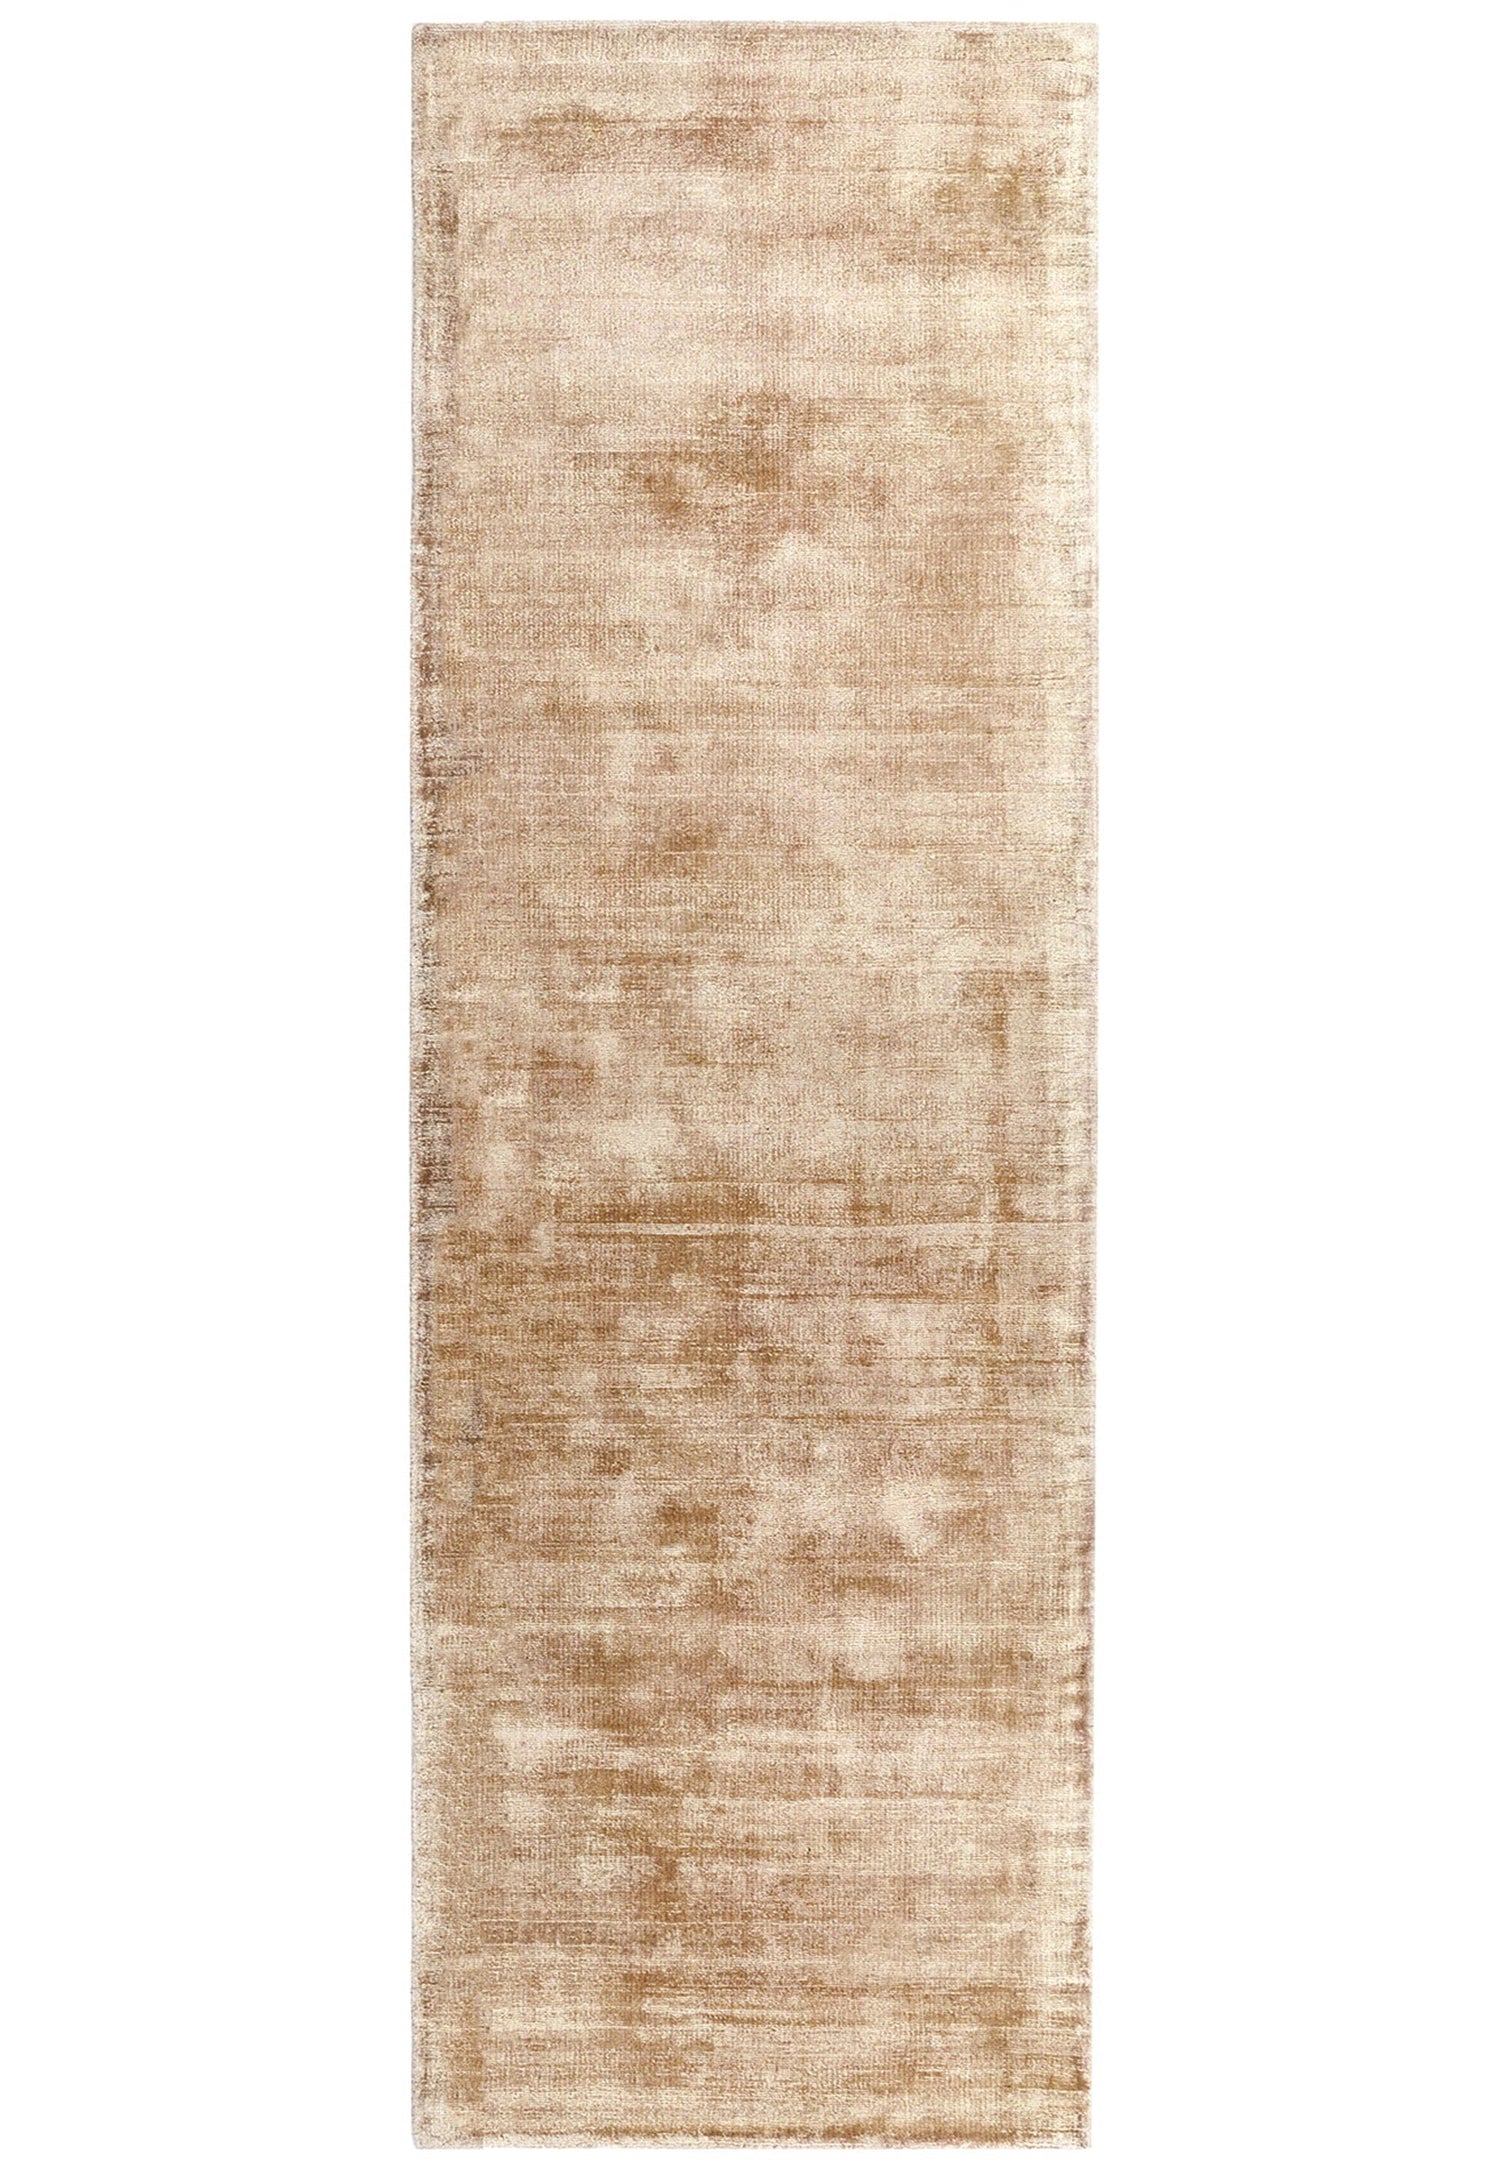  Asiatic Carpets-Asiatic Carpets Blade Hand Woven Runner Champagne - 66 x 240cm-Beige, Natural 053 